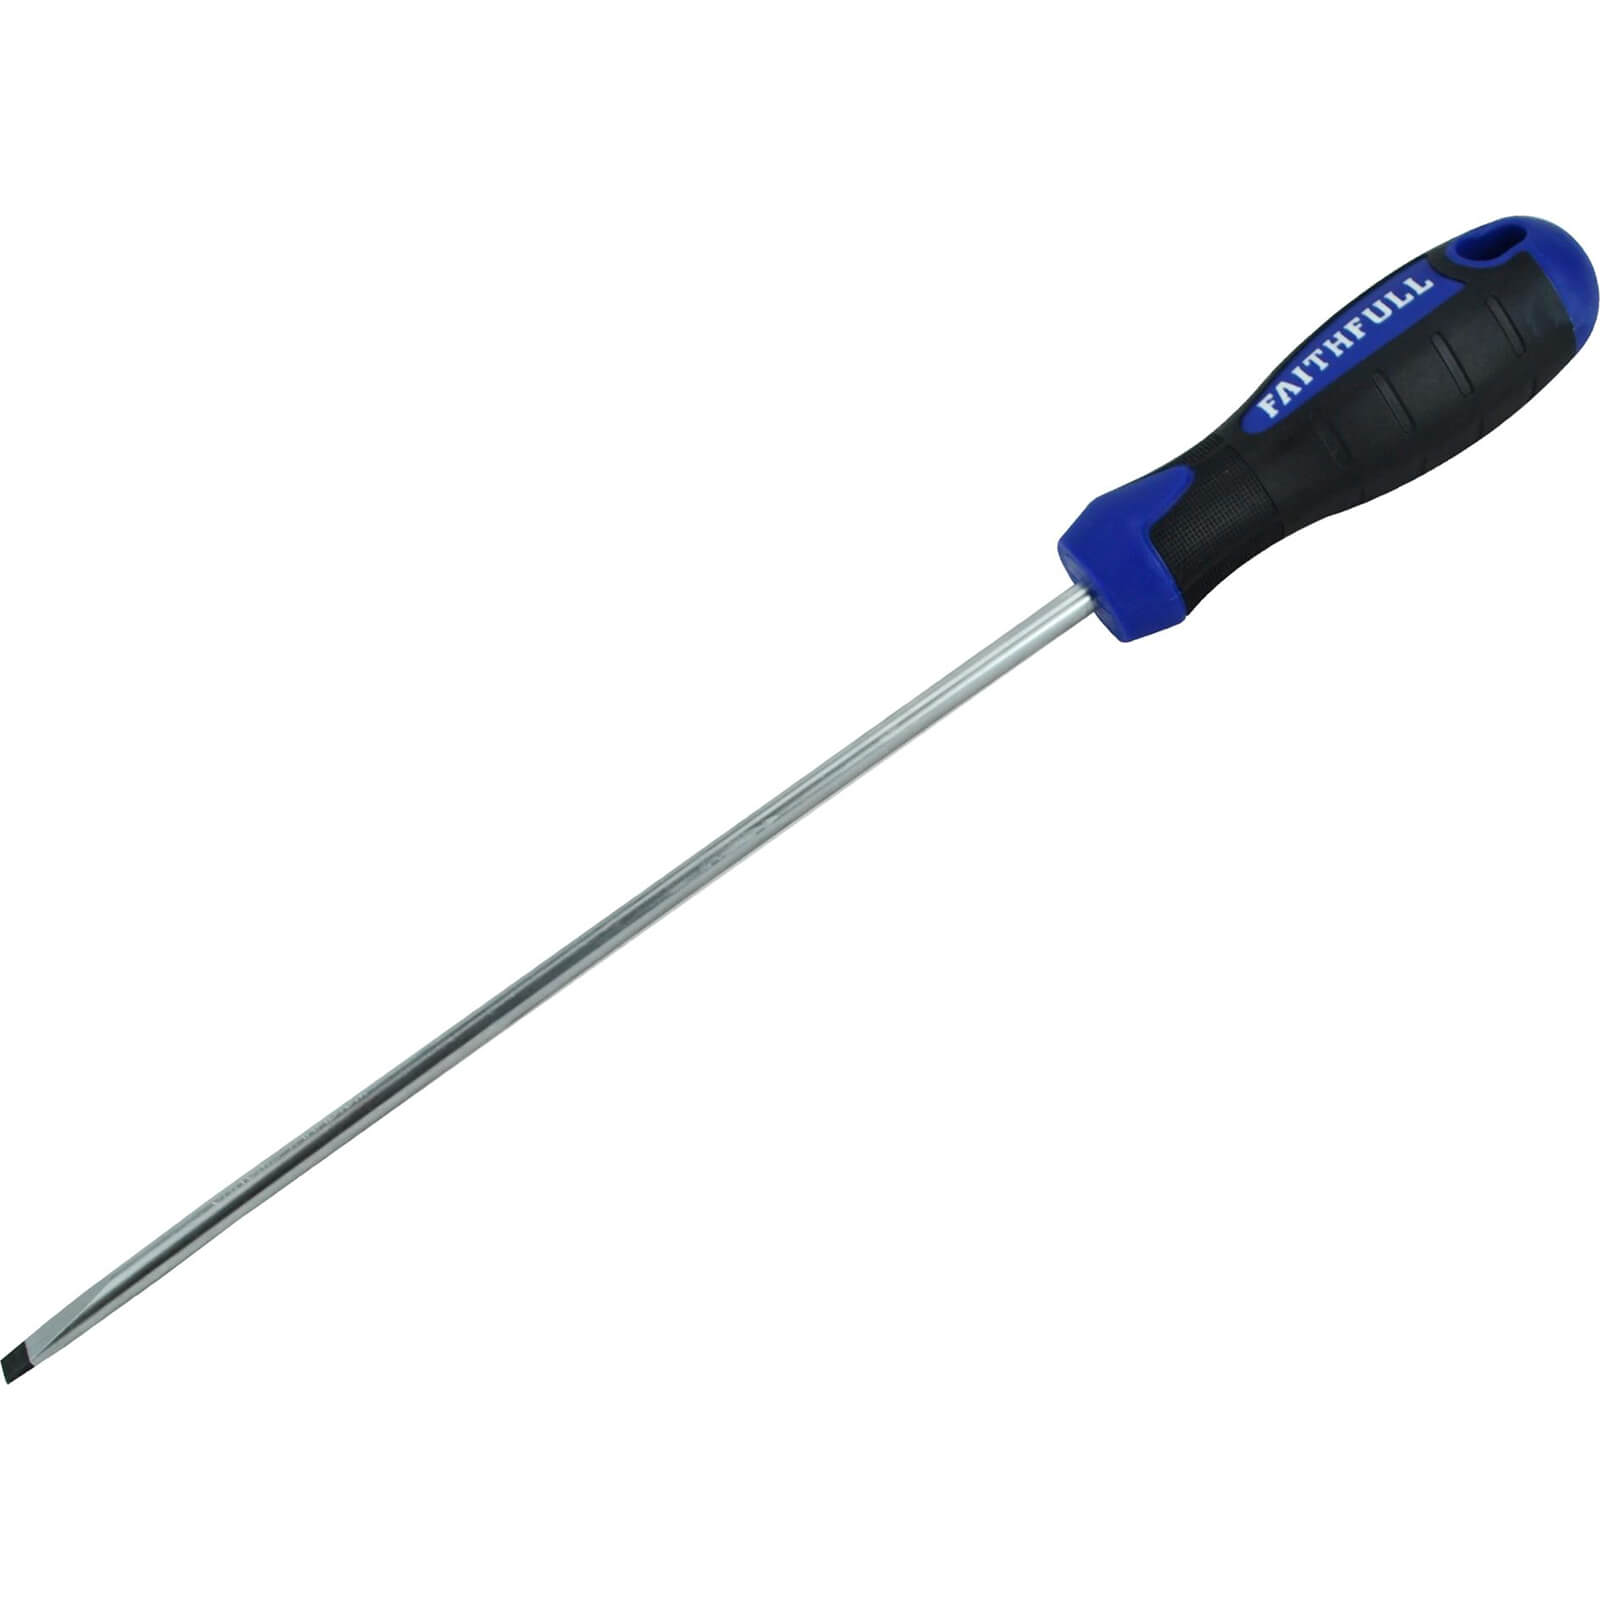 Image of Faithfull Soft Grip Parallel Slotted Tip Screwdriver 5.5mm 200mm